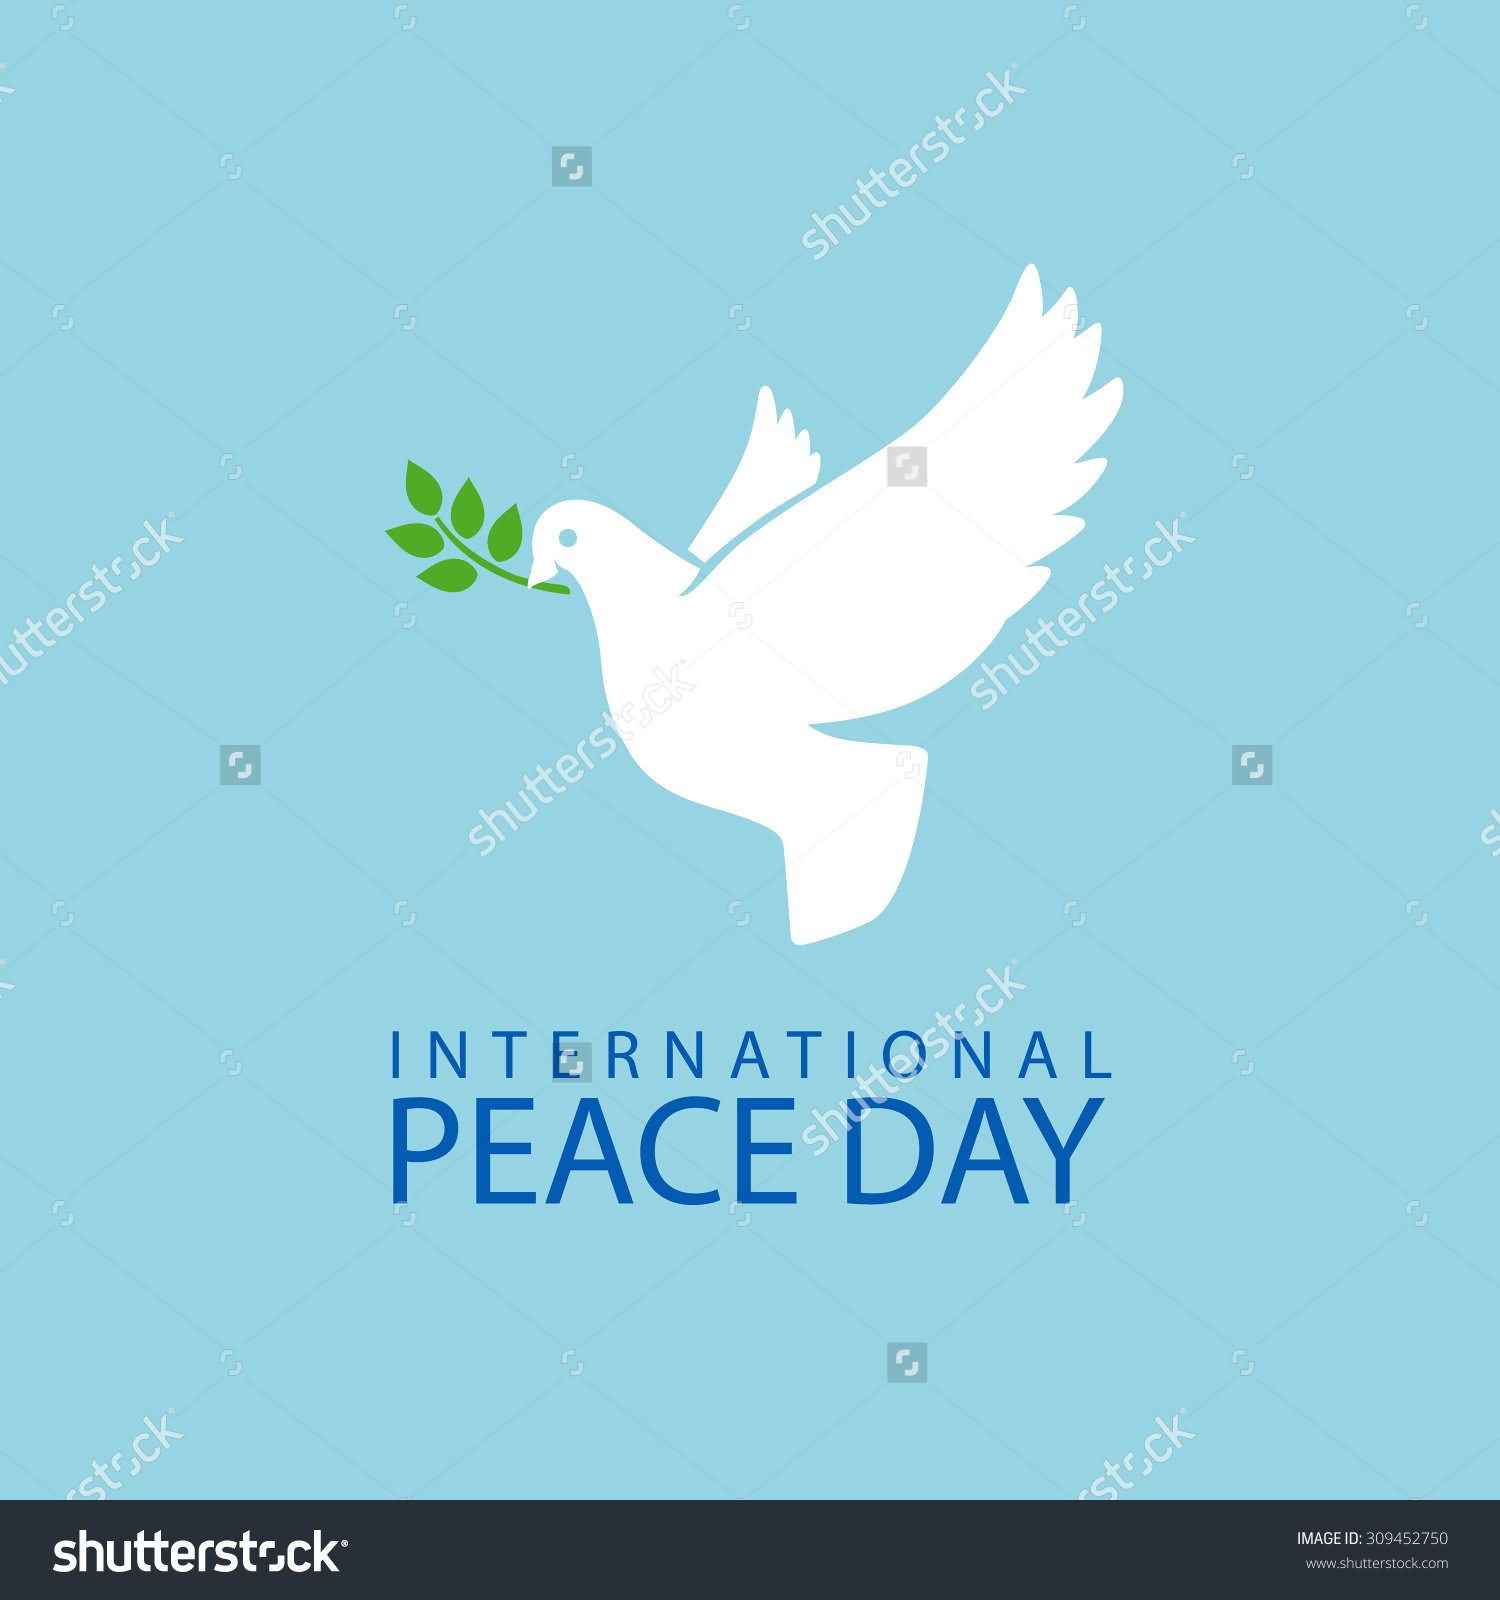 International Peace day Poster